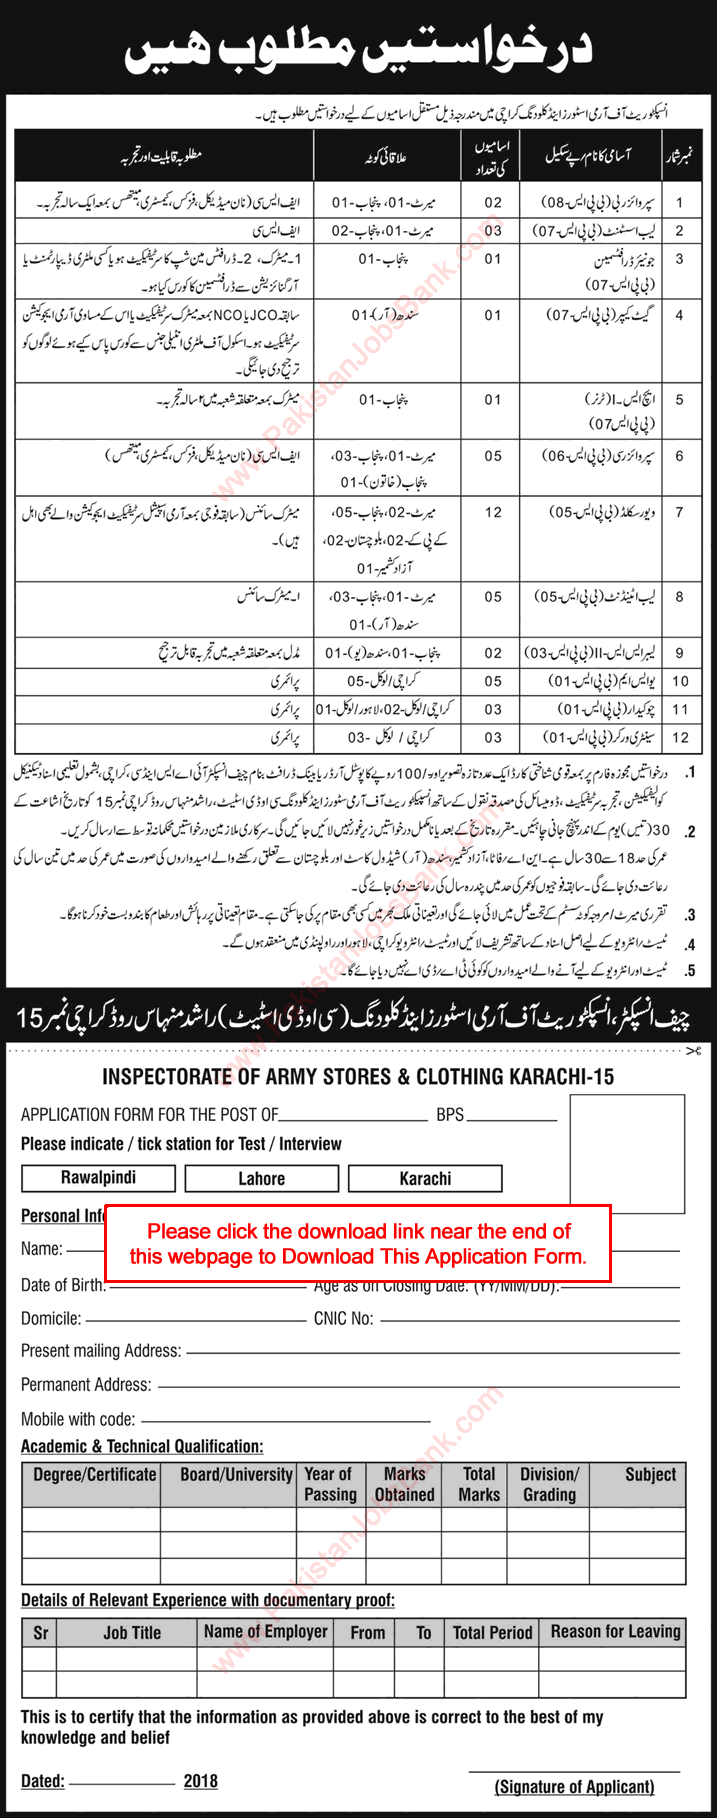 Inspectorate of Army Stores and Clothing Karachi Jobs 2018 June Application Form Download Latest